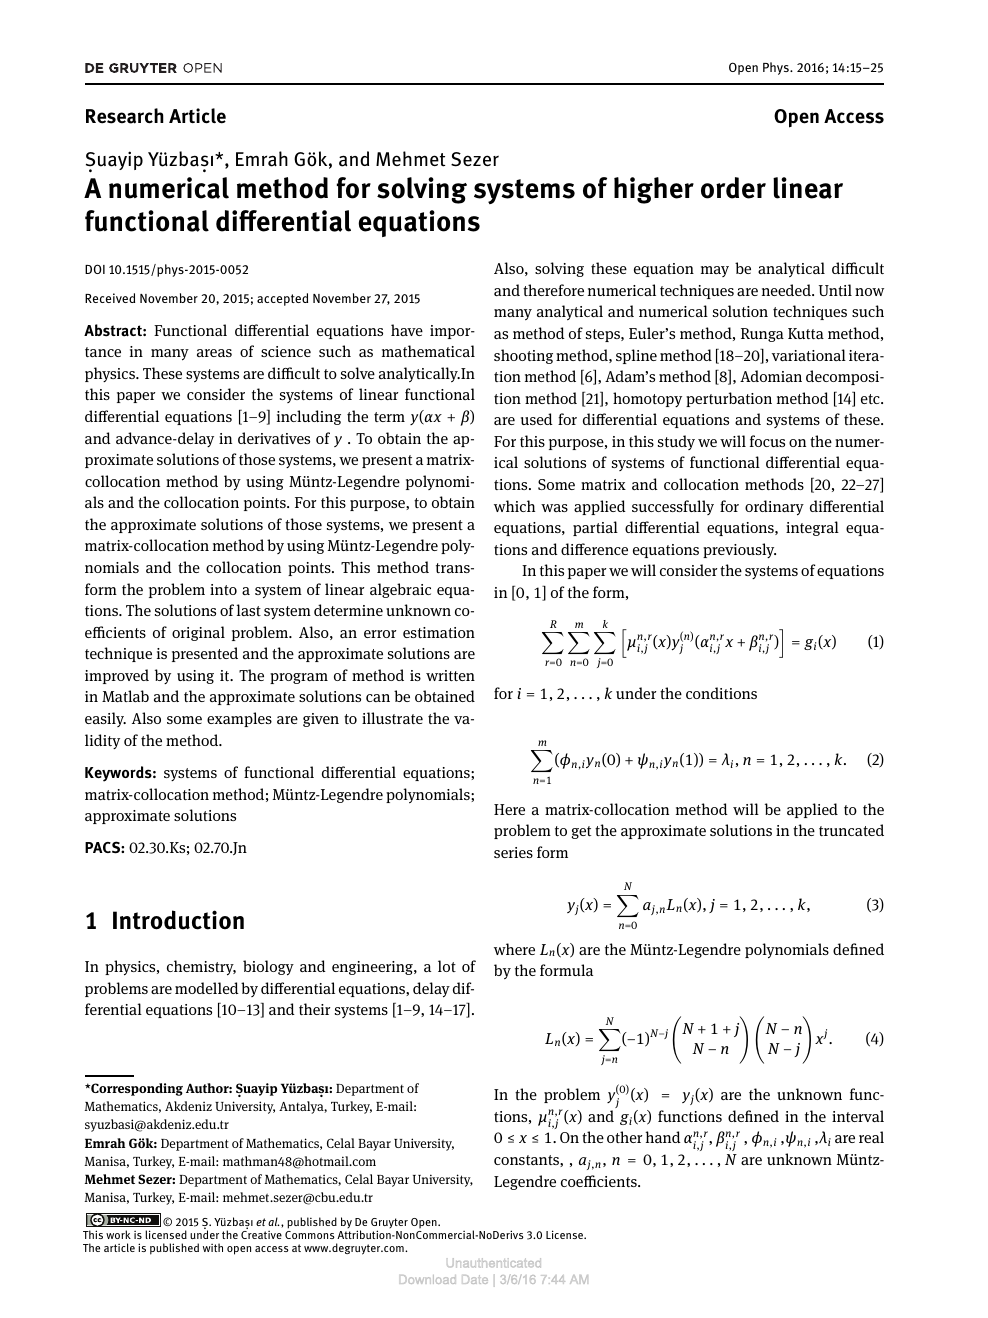 A Numerical Method For Solving Systems Of Higher Order Linear Functional Differential Equations Topic Of Research Paper In Mathematics Download Scholarly Article Pdf And Read For Free On Cyberleninka Open Science